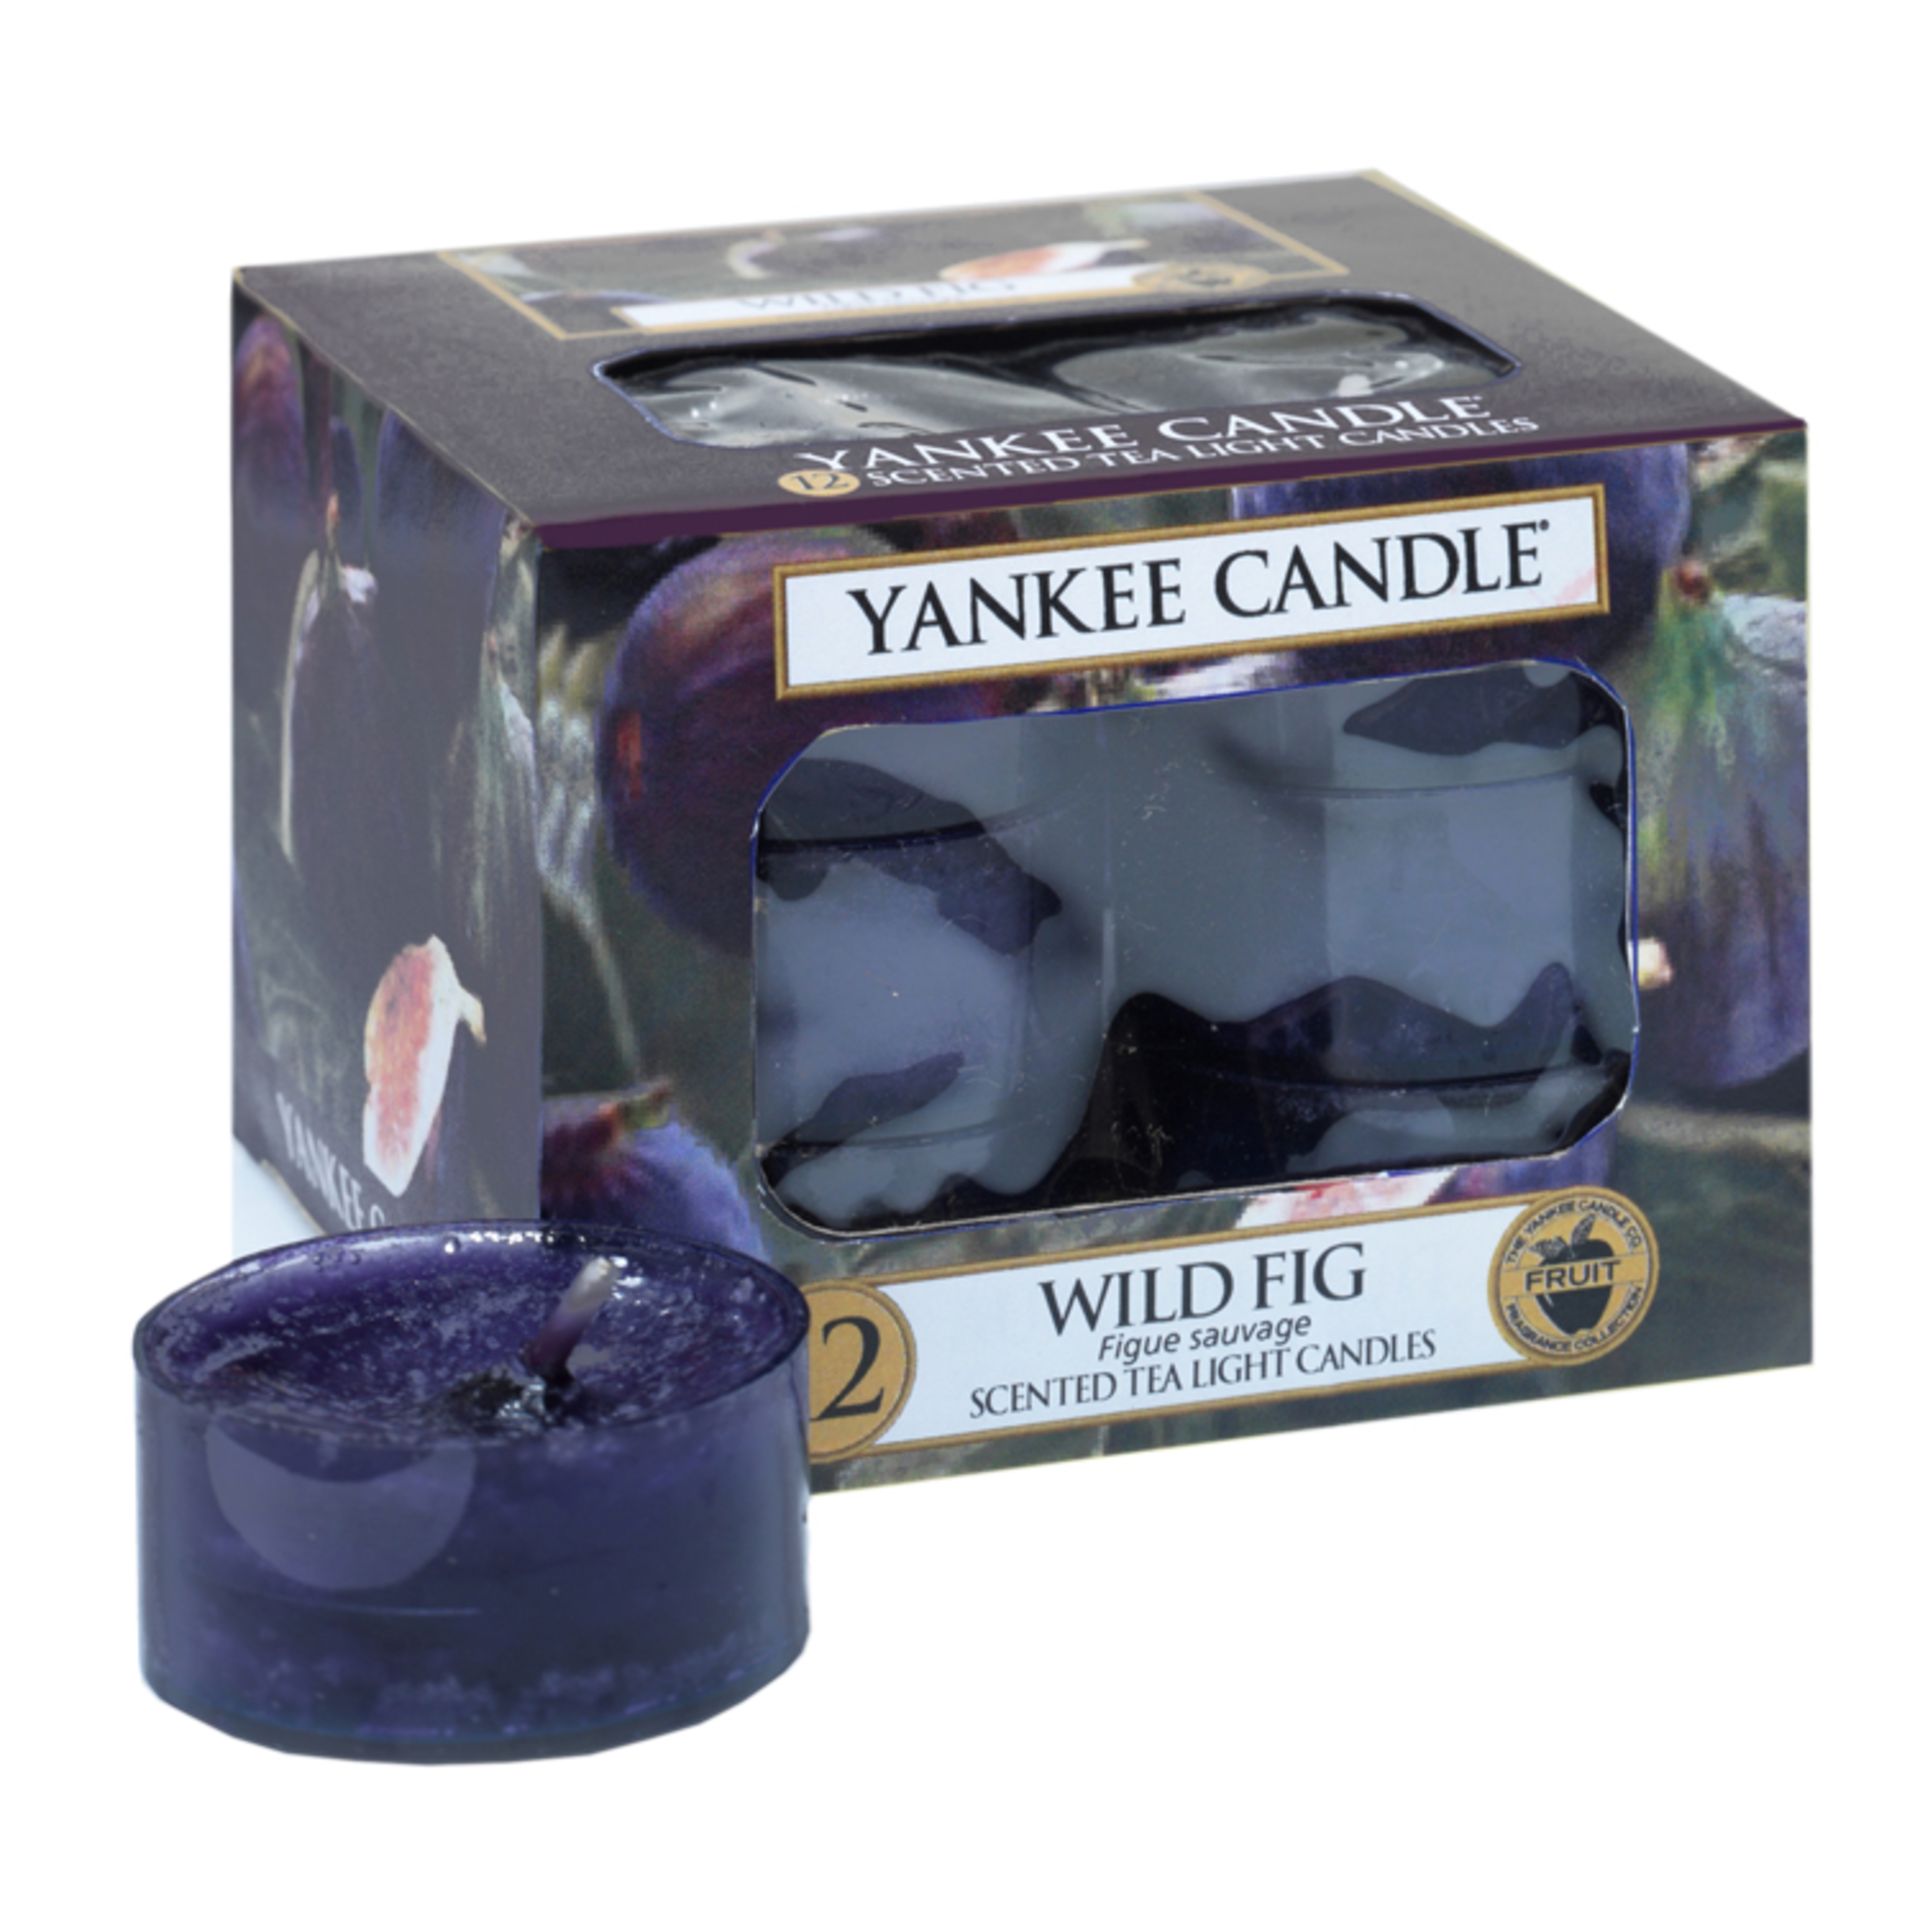 V Brand New 12 Yankee Candle Scented Tea Light Candles Wild Fig eBay Price £7.75